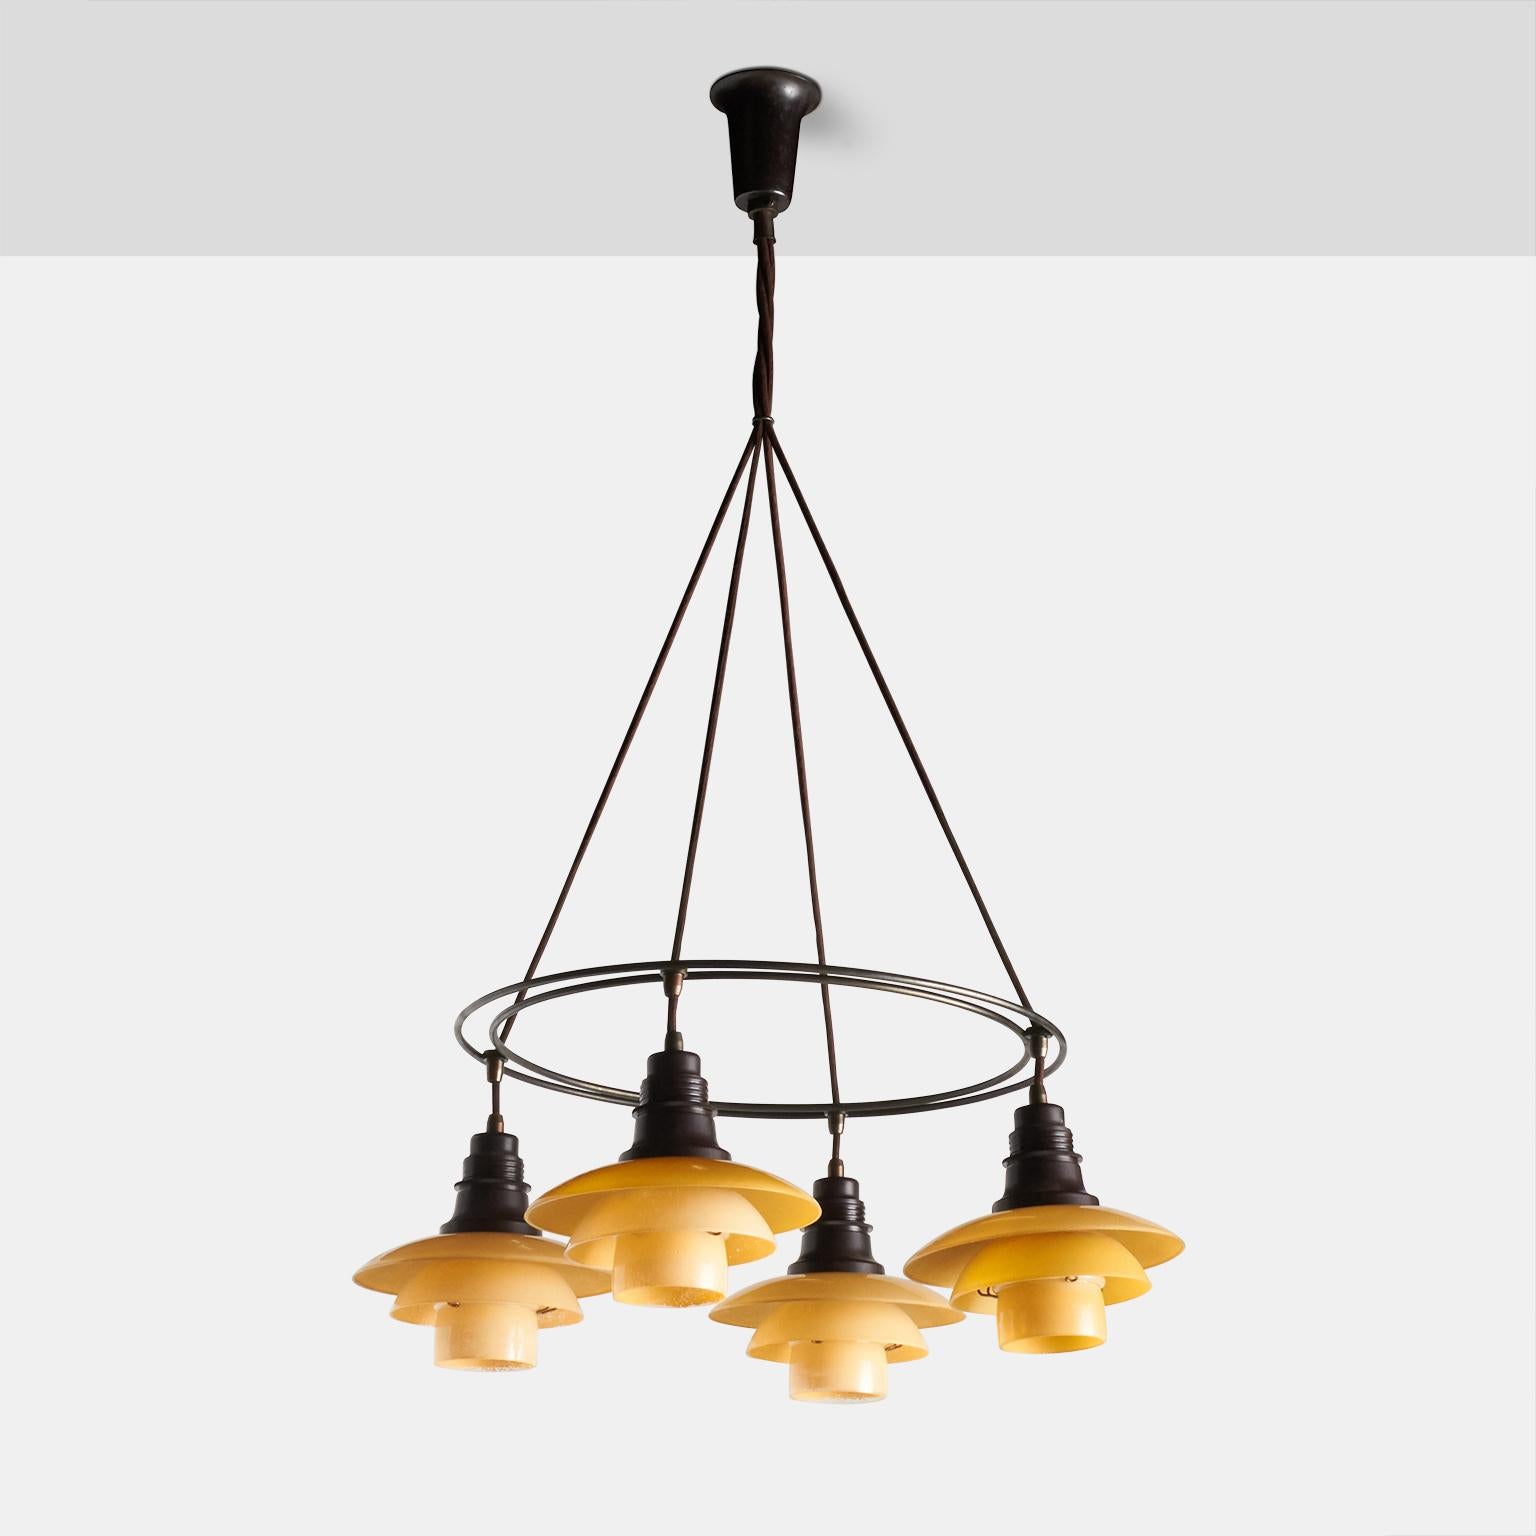 A double ring chandelier by Poul Henningsen. Features a browned brass frame, four shades of 2/2 yellow/matte glass with bakelite socket covers and wire holders. Stamped 